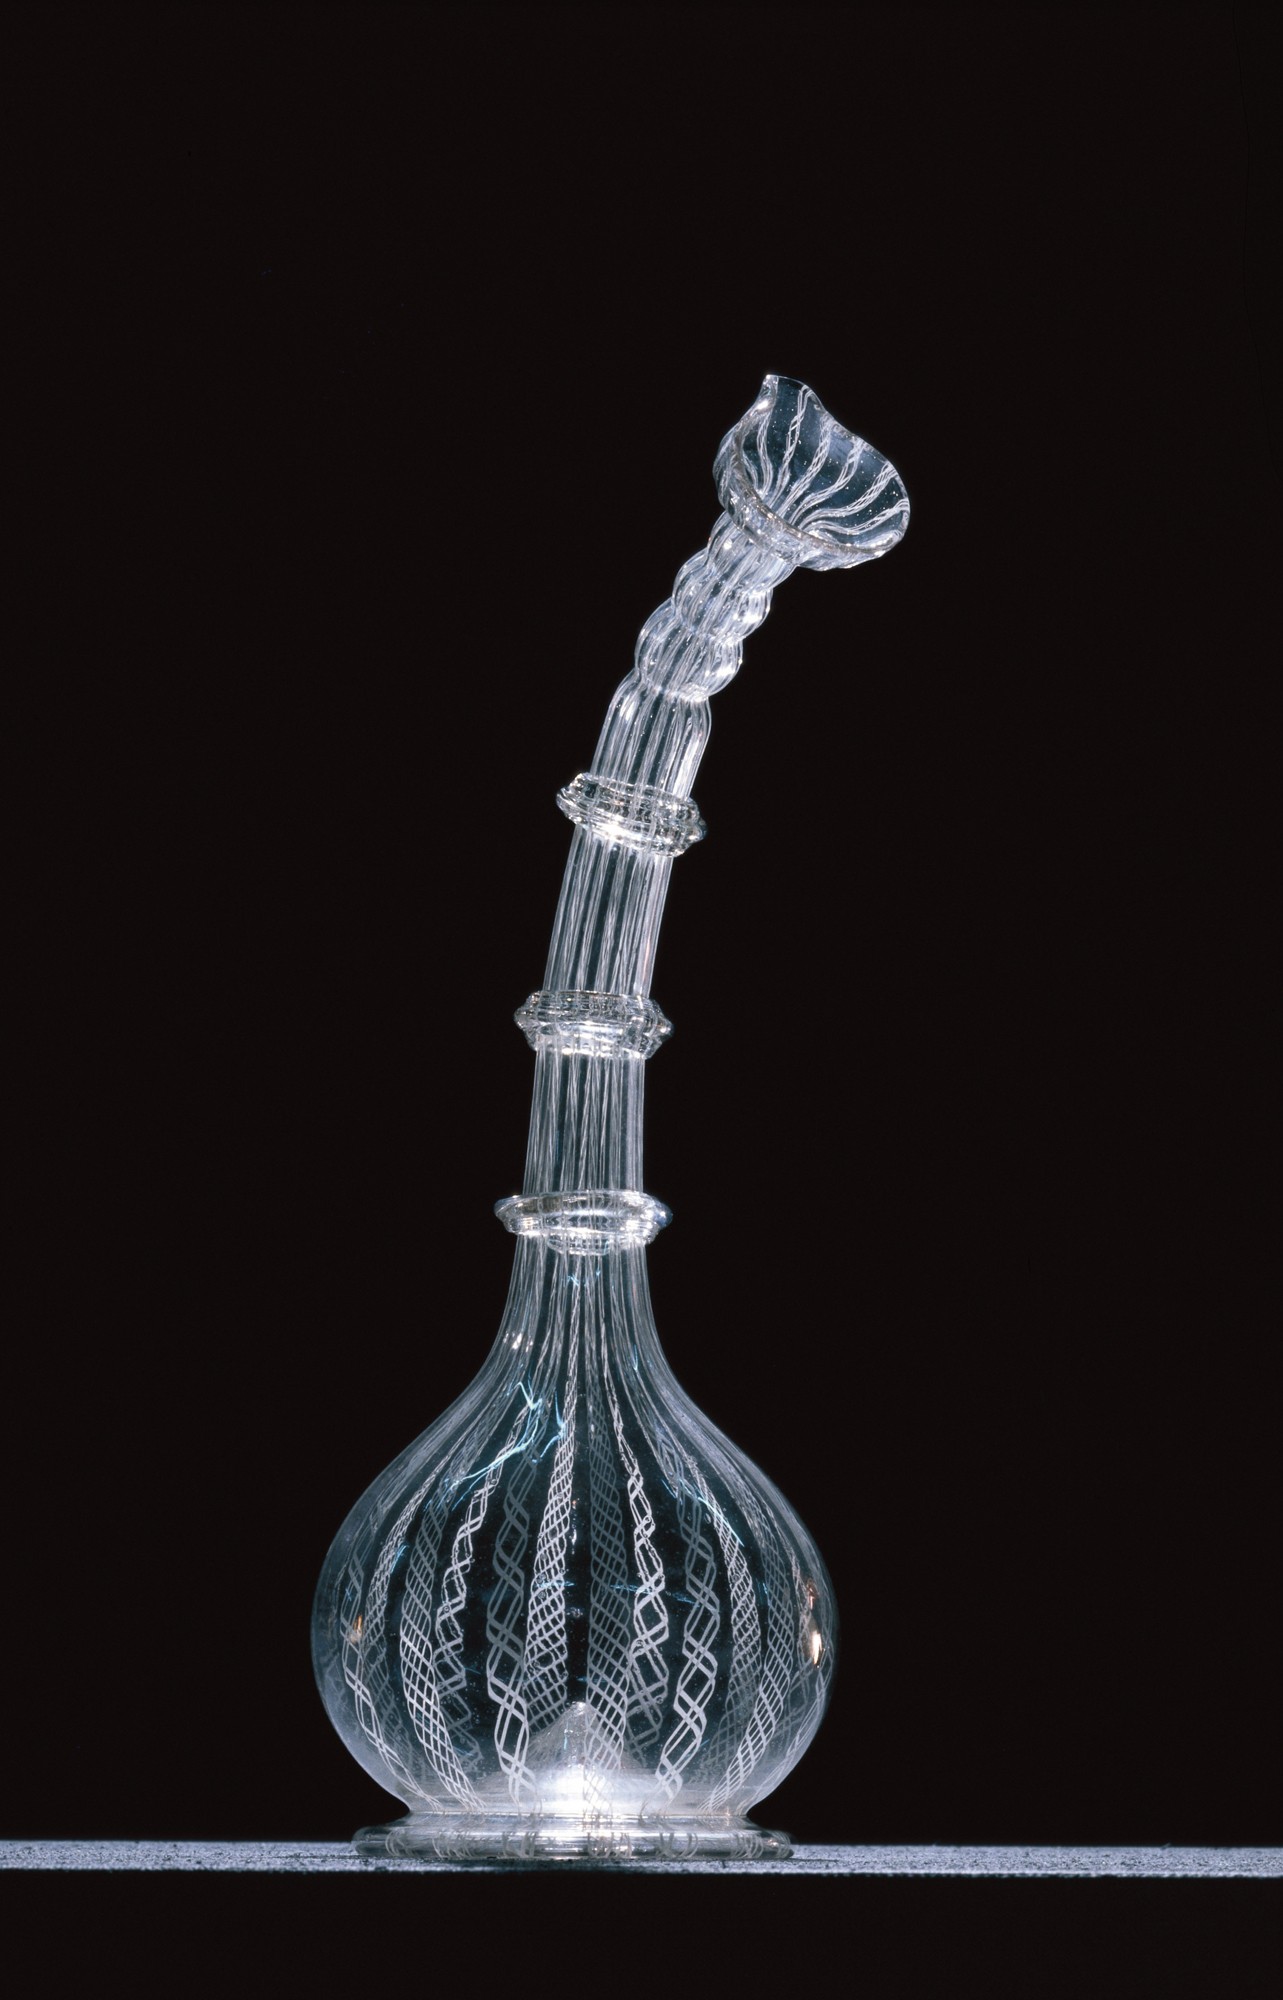 <BODY><div>KUTTROLF</div><div>Manufacture: Venice or Imperial Glass Factory, Innsbruck, ca. 1580</div><div>Colorless glass, with white threaded pattern</div><div>KHM 317 / 1940</div></BODY>